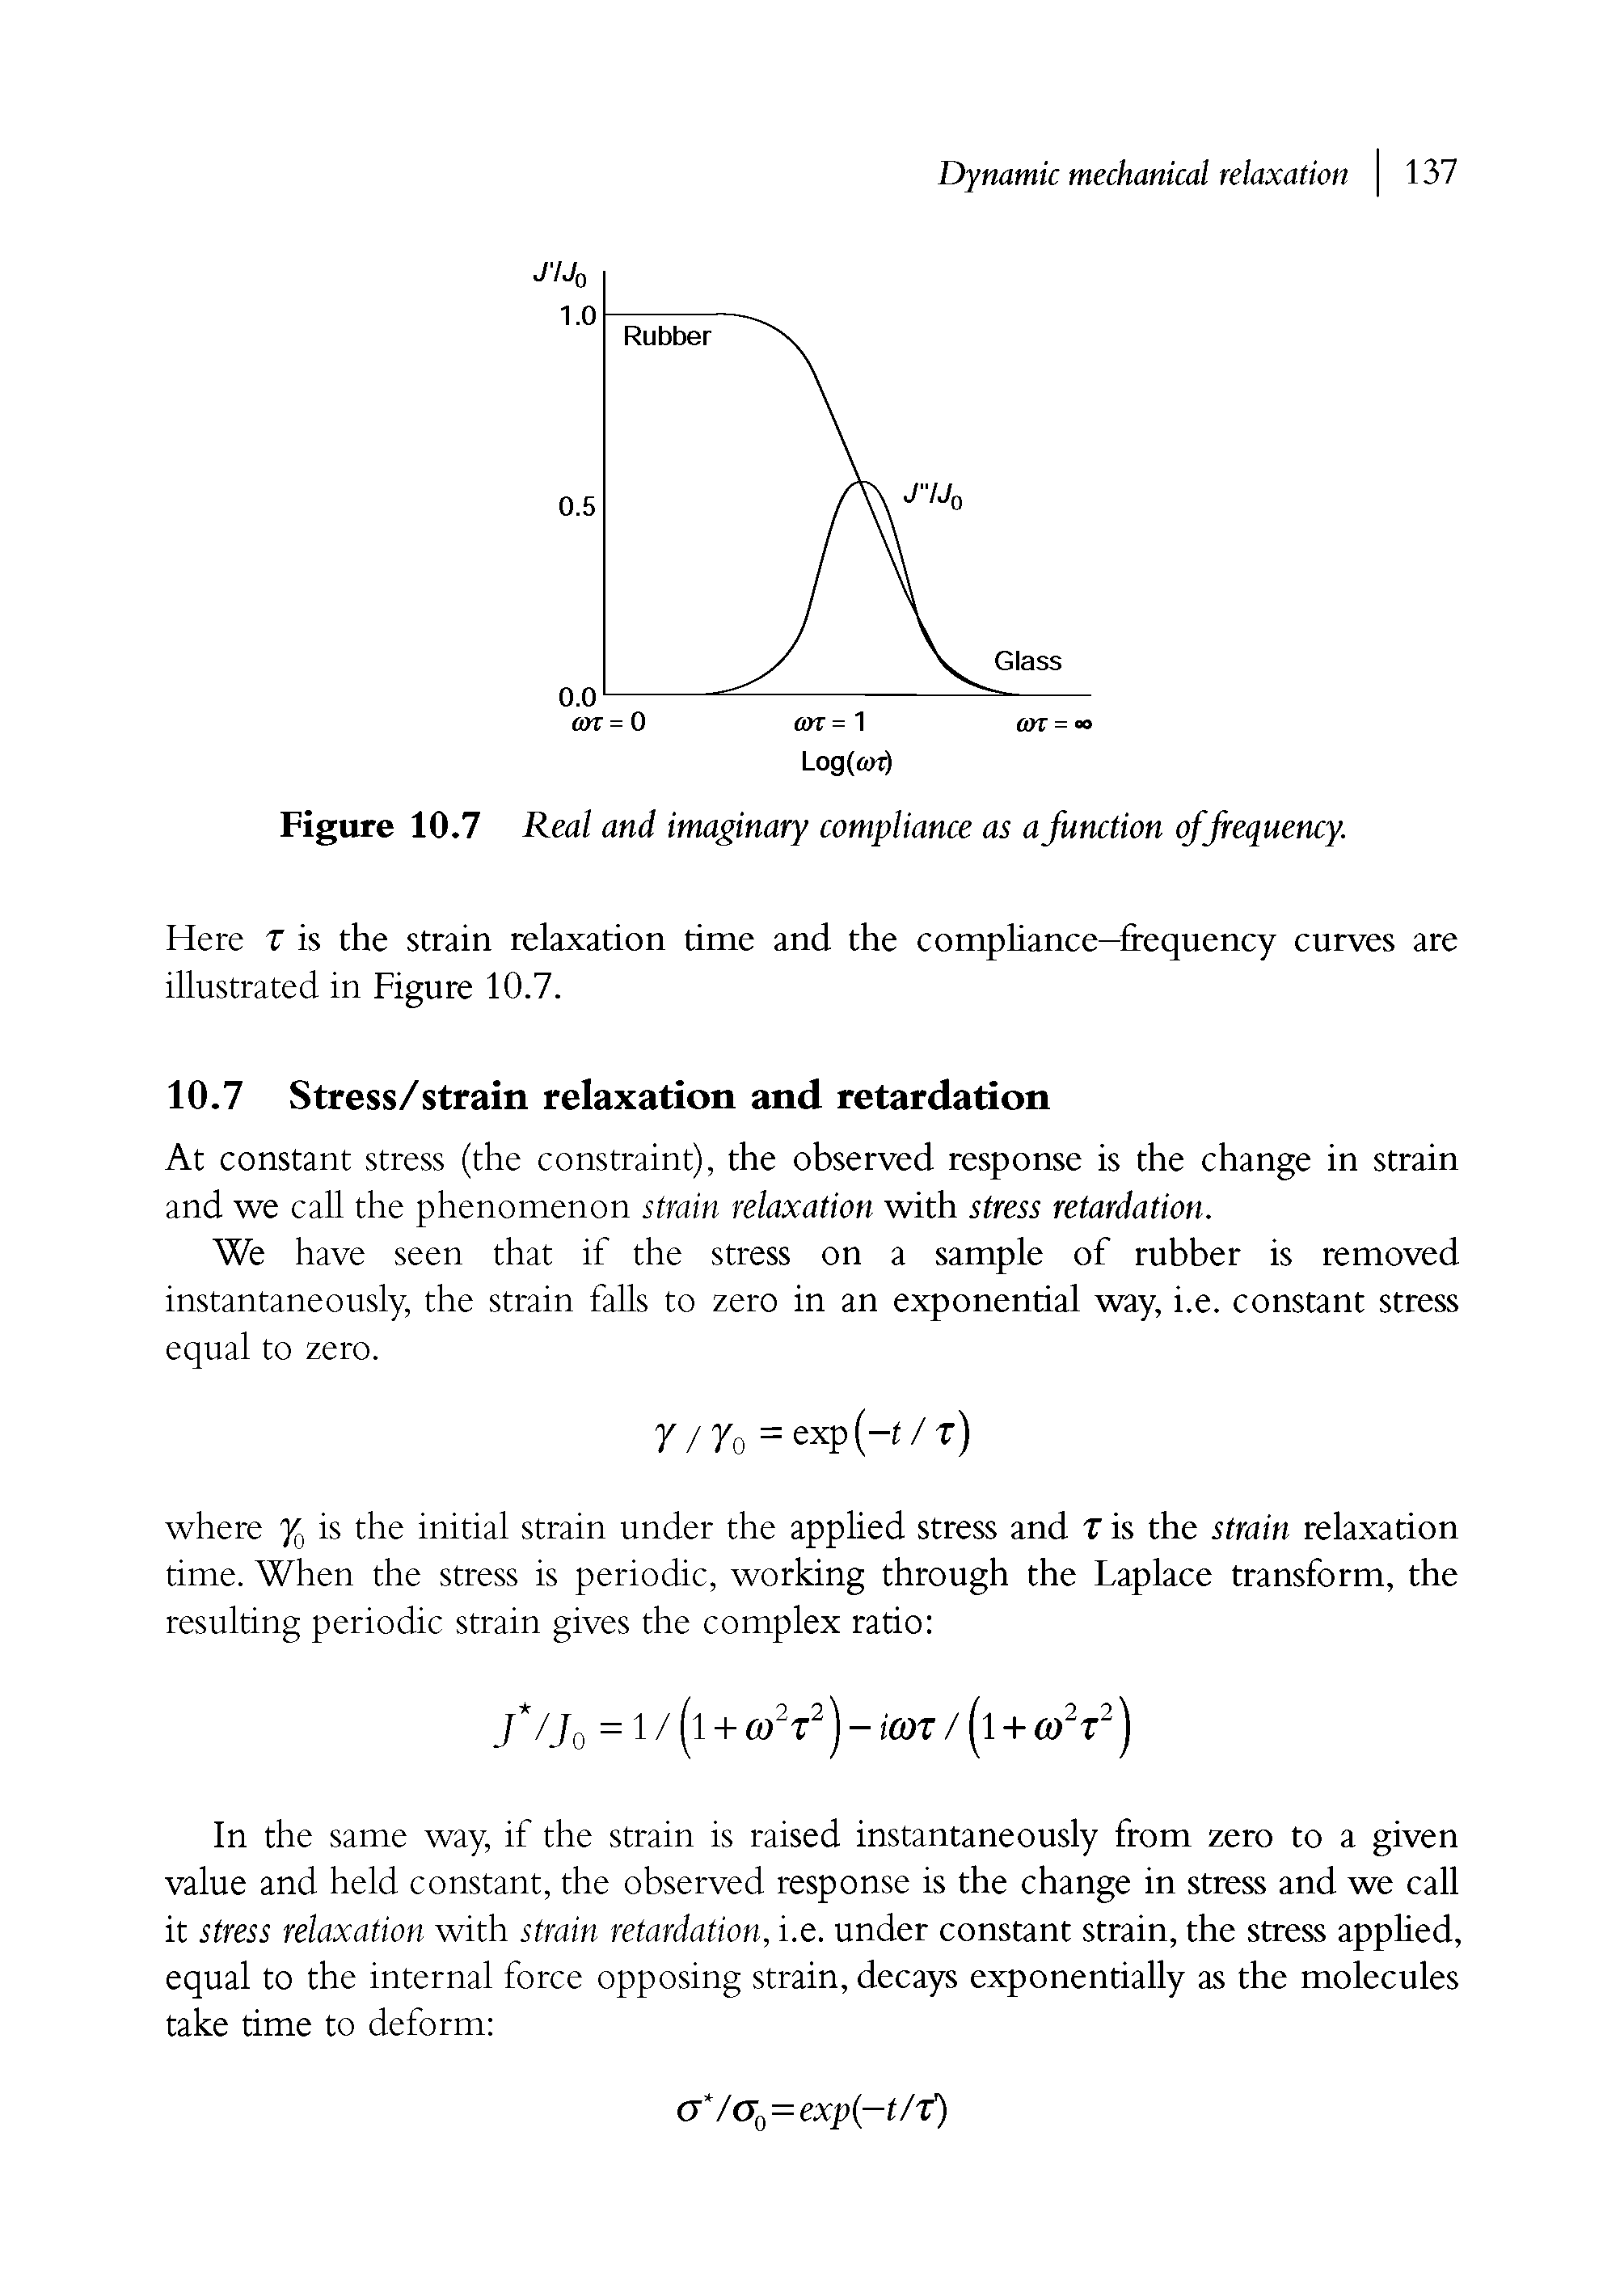 Figure 10.7 Real and imaginary compliance as a function of frequency.